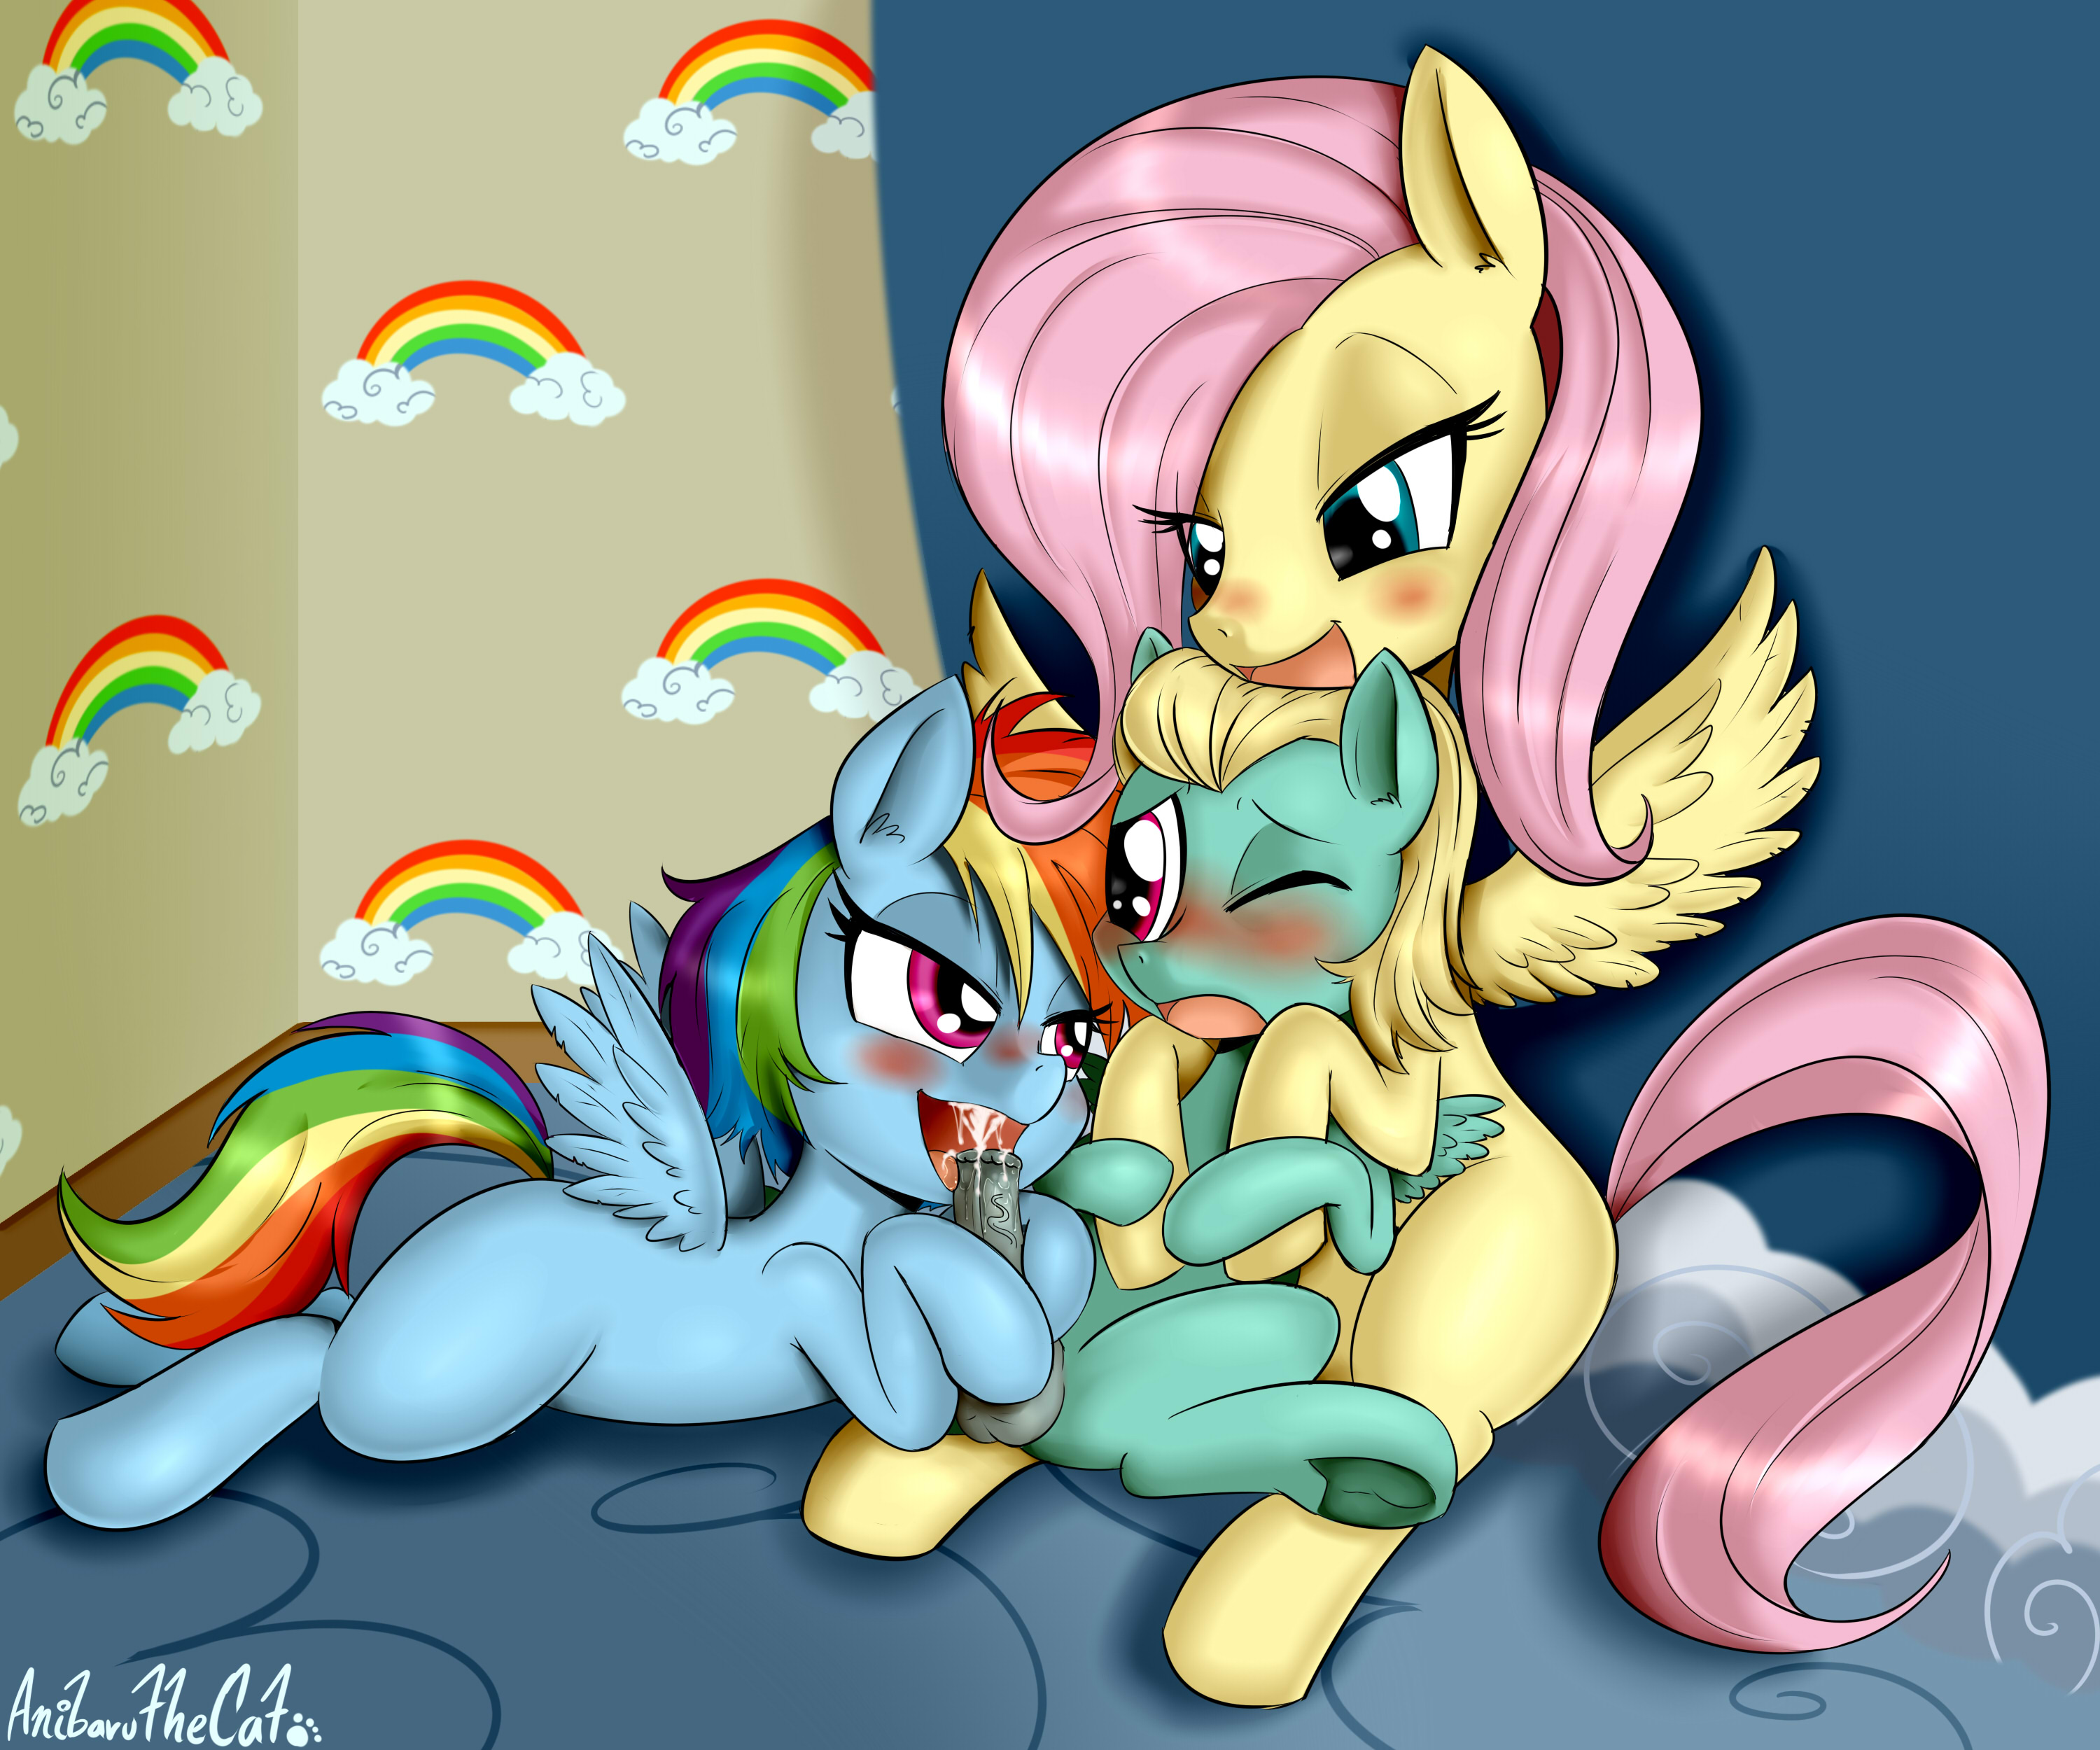 Furry Porn Rainbow Dash And Fluttershy - Showing Xxx Images for Furry mlp porn fluttershy xxx | www ...